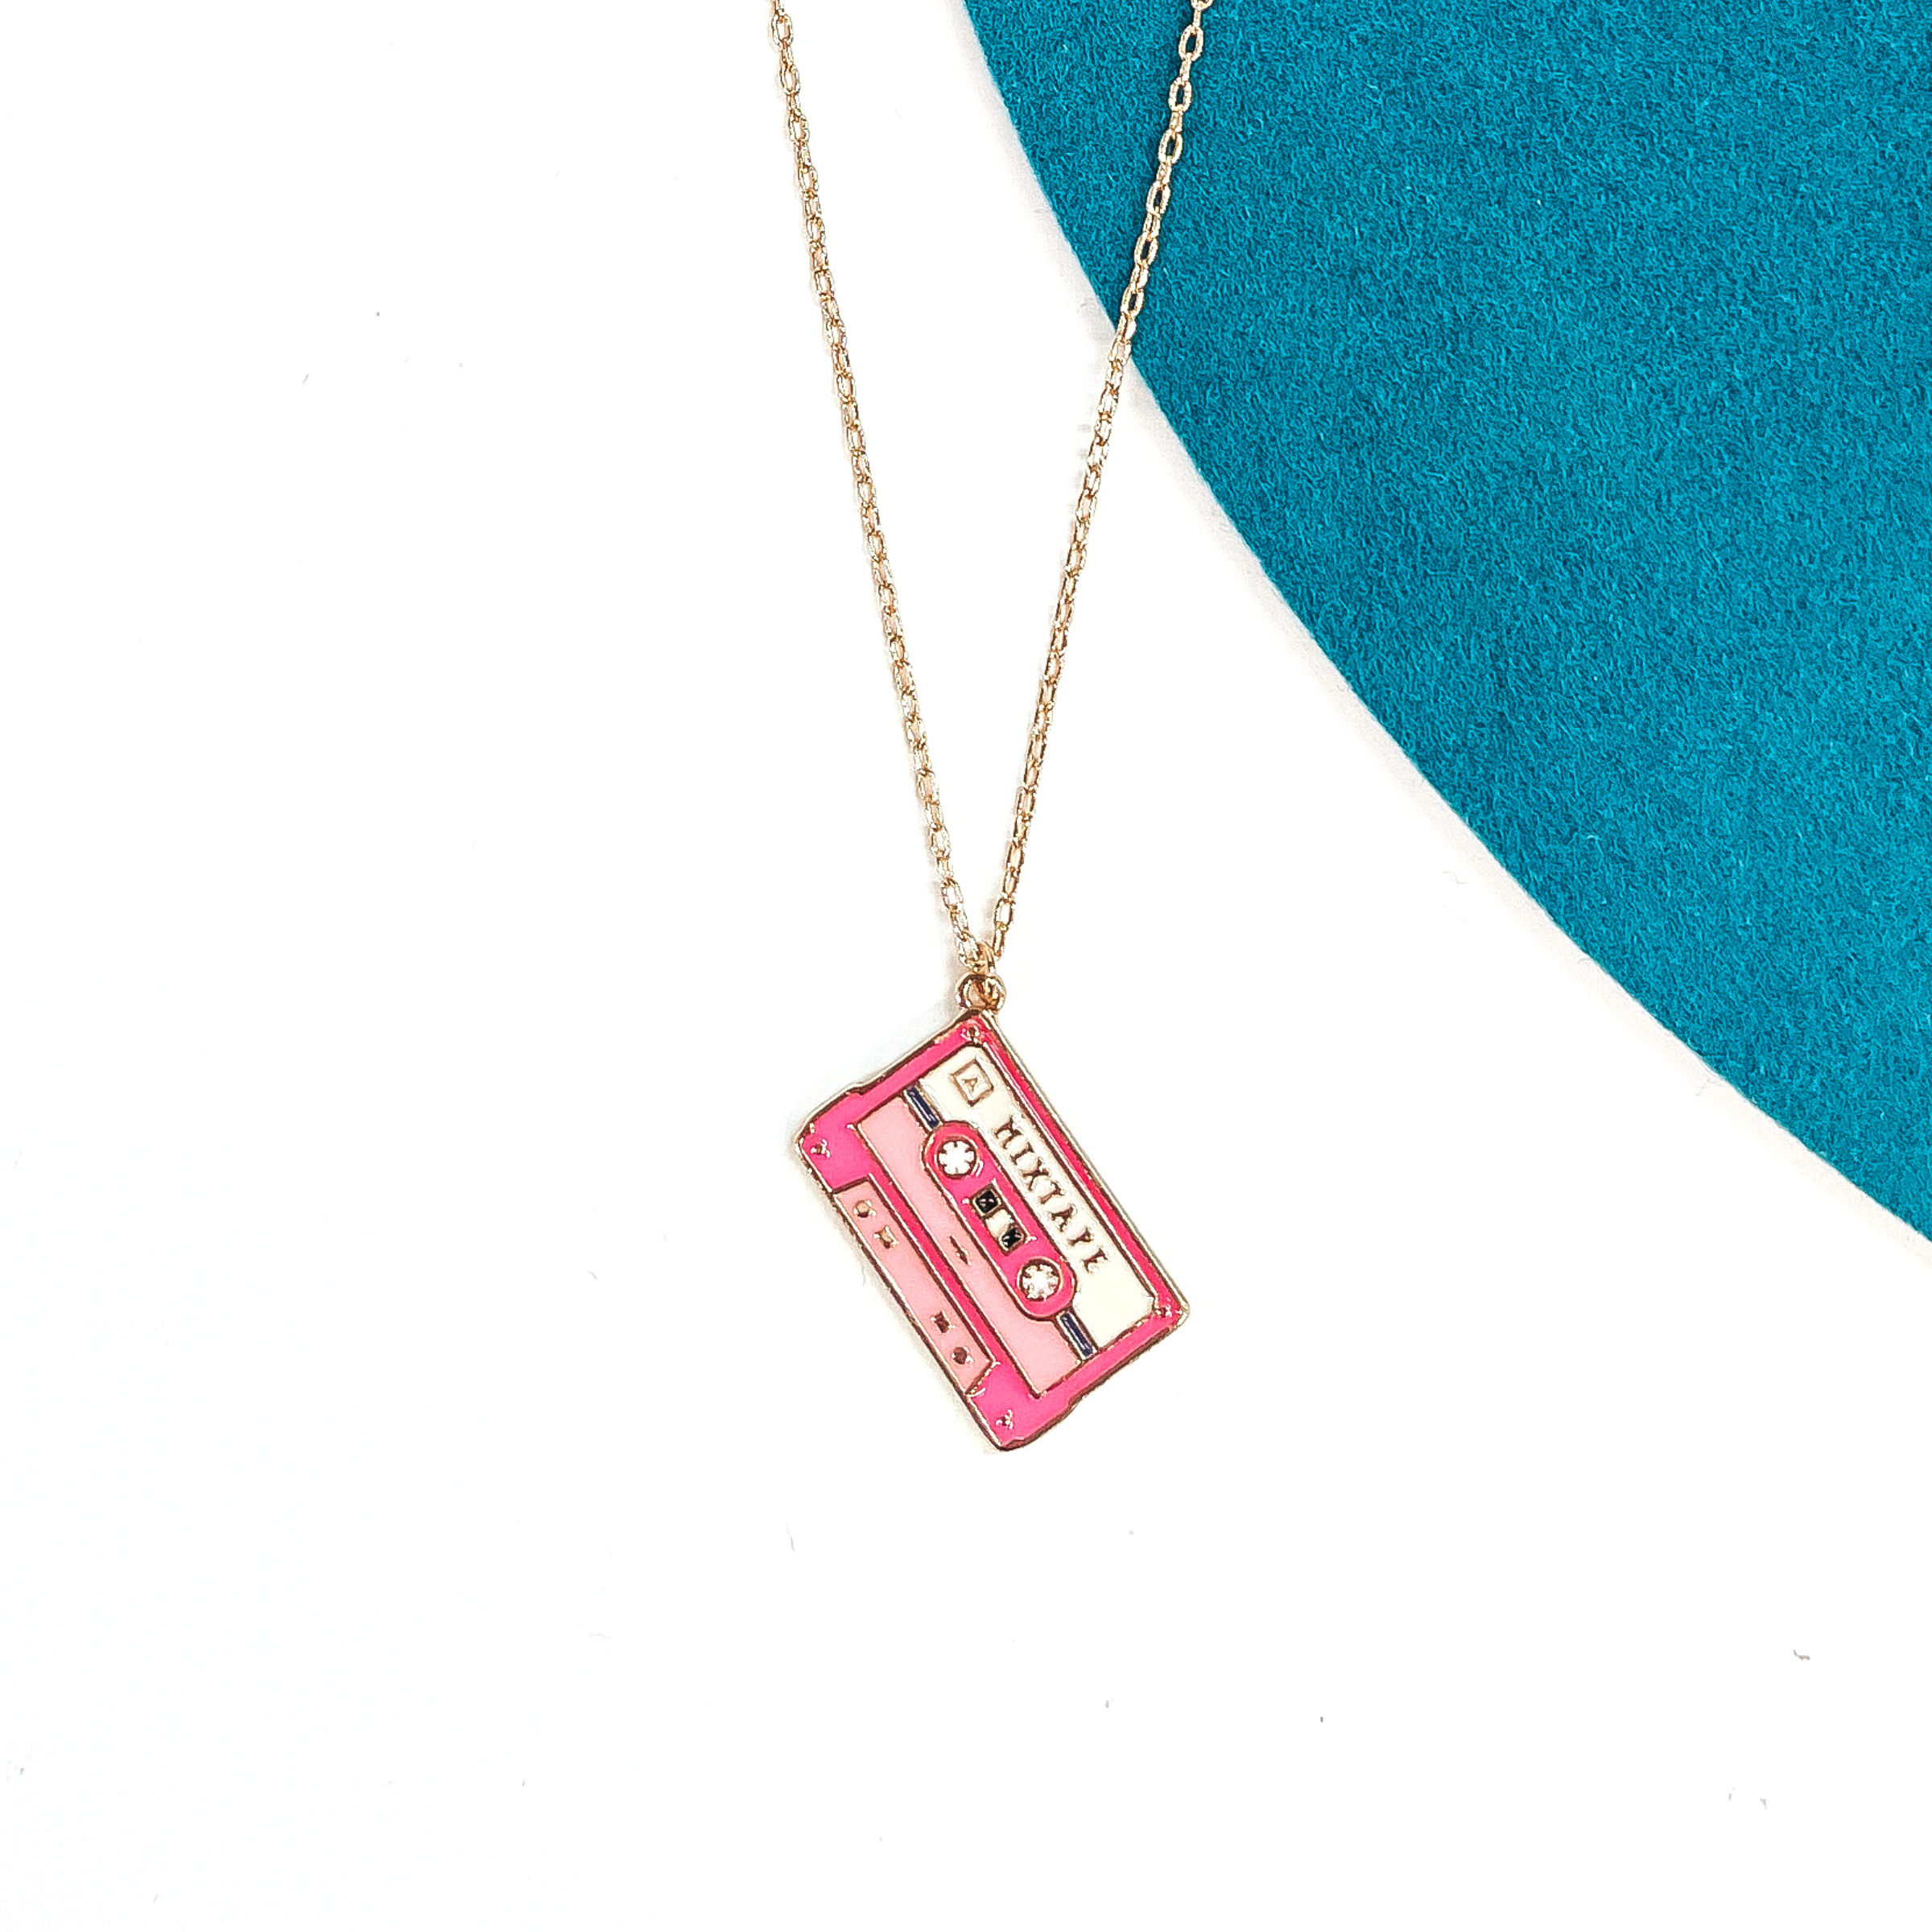 Gold thin chain necklace with a pink cassette tape pendant. The cassette pendant  has different shades of pink and with gold tone embellishments. This necklace  is laying on a white background and a teal felt hat brim.